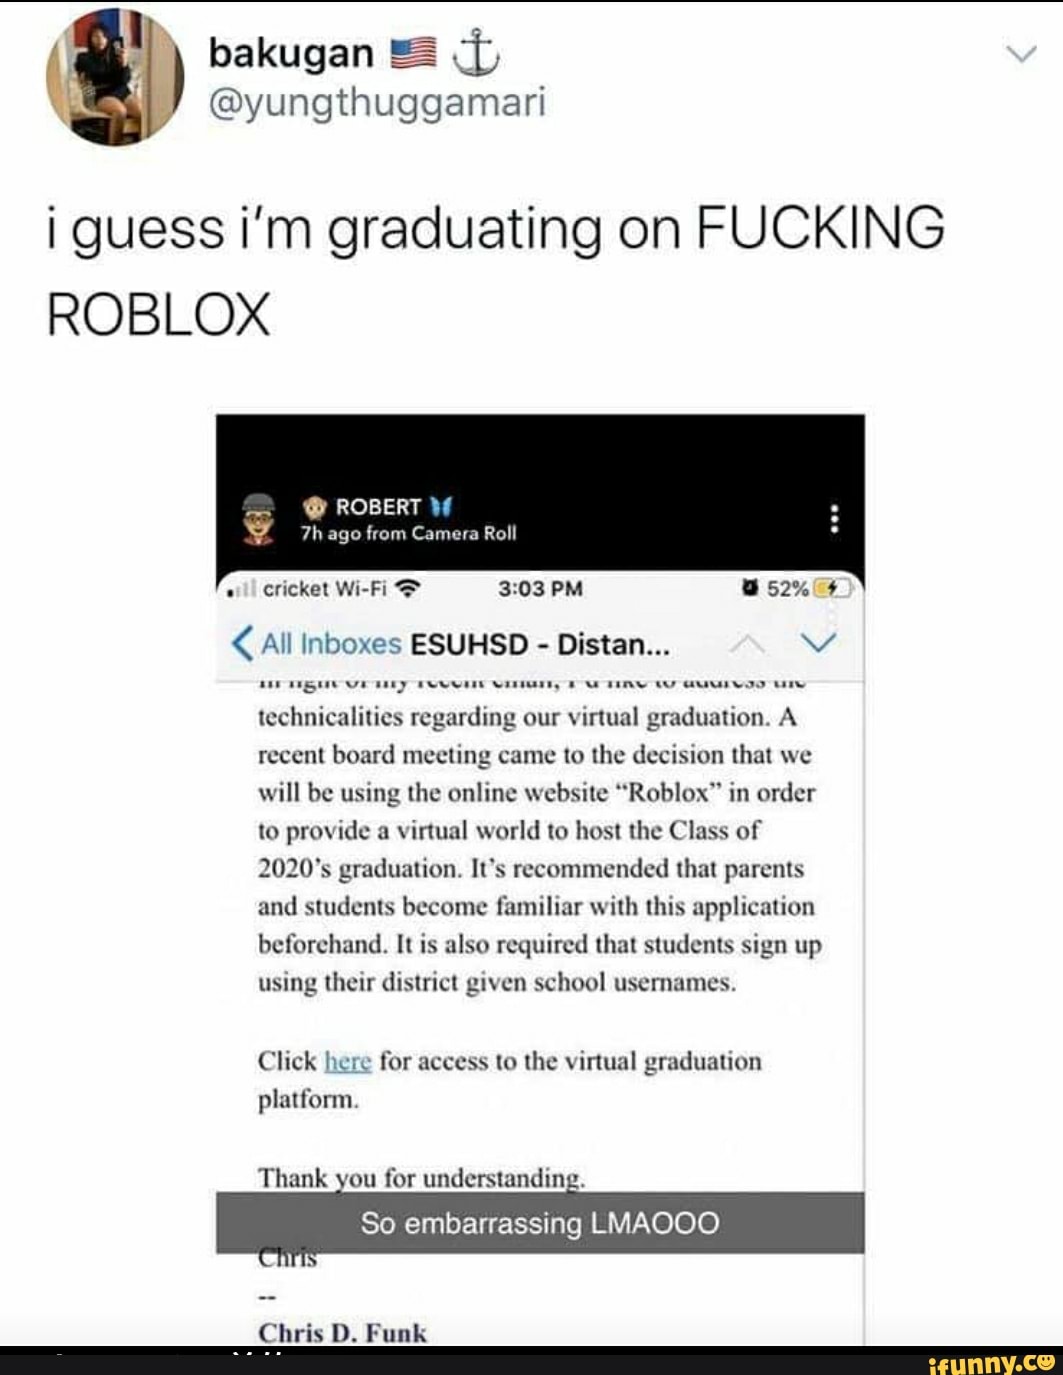 I Guess I M Graduating On Fucking Roblox All Inboxes Esuhsd Distan Vv Technicalities Regarding Our Virtual Graduation A Recent Board Meeting Came To The Decision That We Will Be Using The Online - signing up roblox web